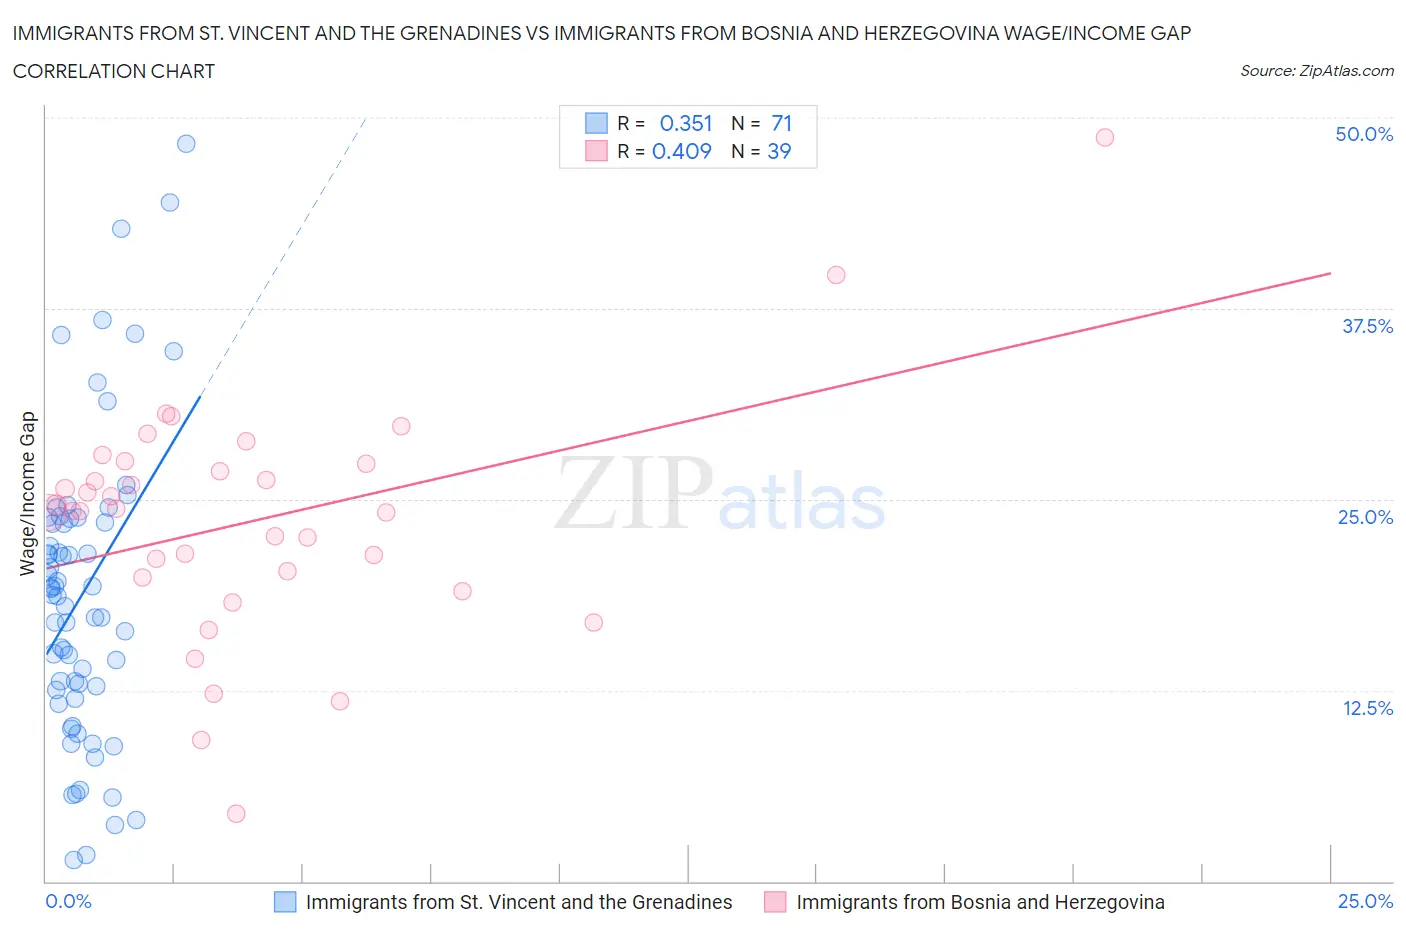 Immigrants from St. Vincent and the Grenadines vs Immigrants from Bosnia and Herzegovina Wage/Income Gap